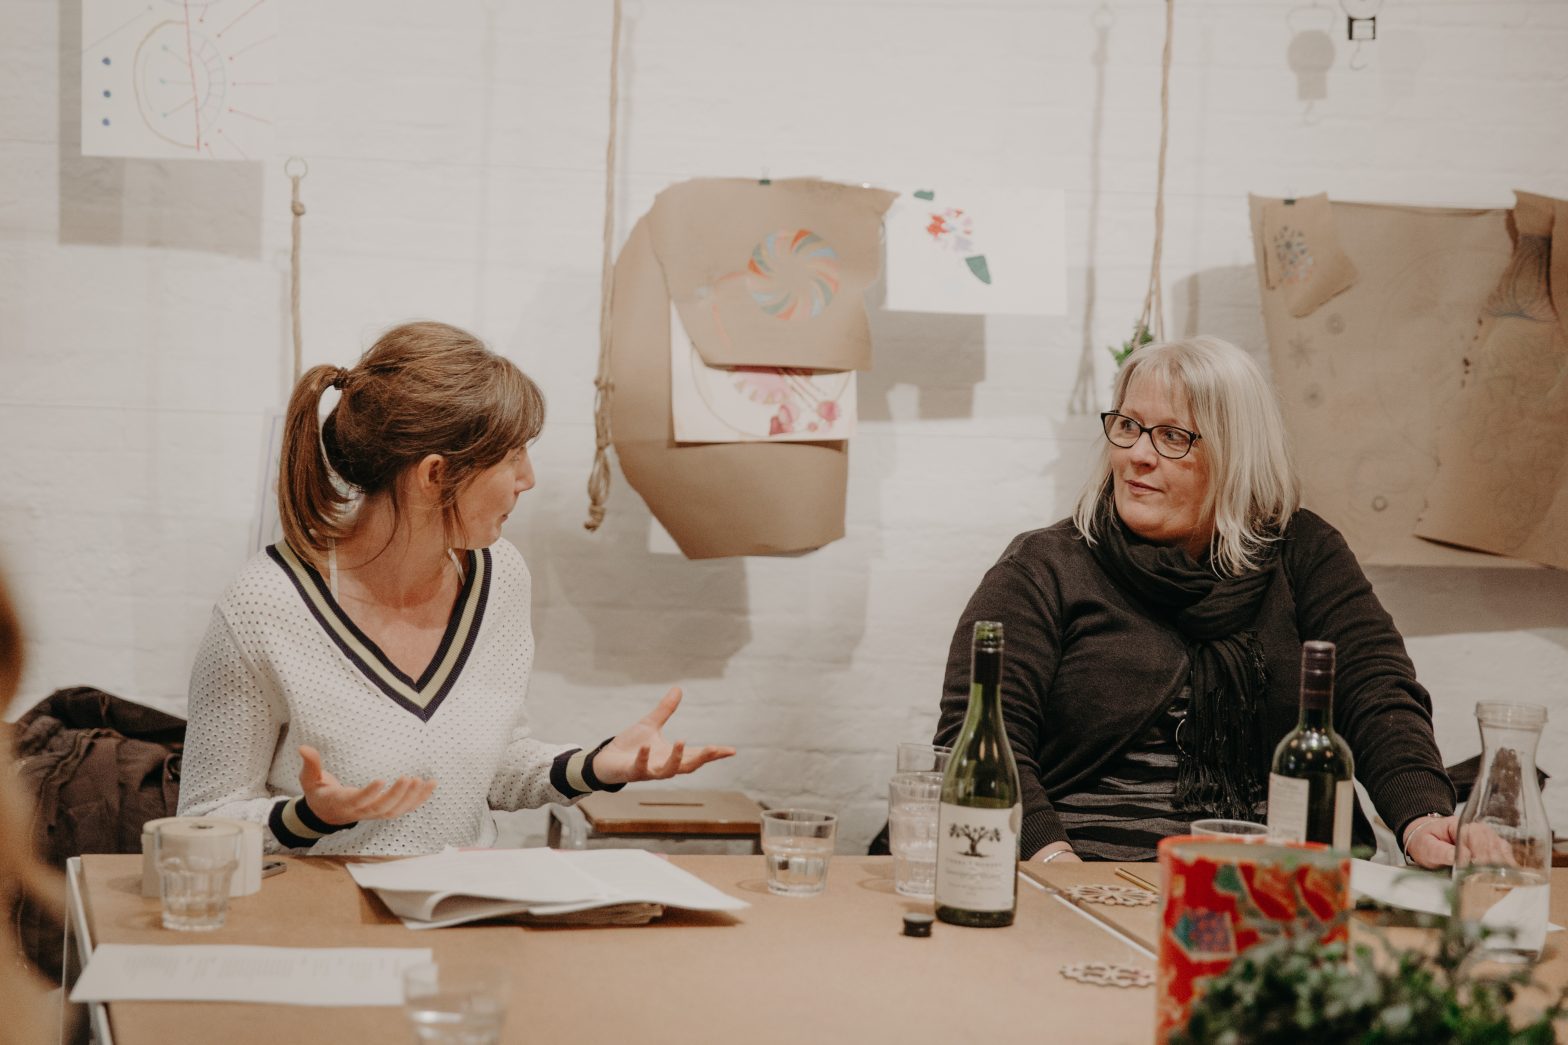 Two women engaged in a discussion in Modern Art Oxford's creative space. The woman on the left has a brown ponytail and is wearing a white jumper, she is gesturing with her hands. The other woman has blonde hair, wears glasses and a black jumper. There is art hanging up on the white walls behind them.